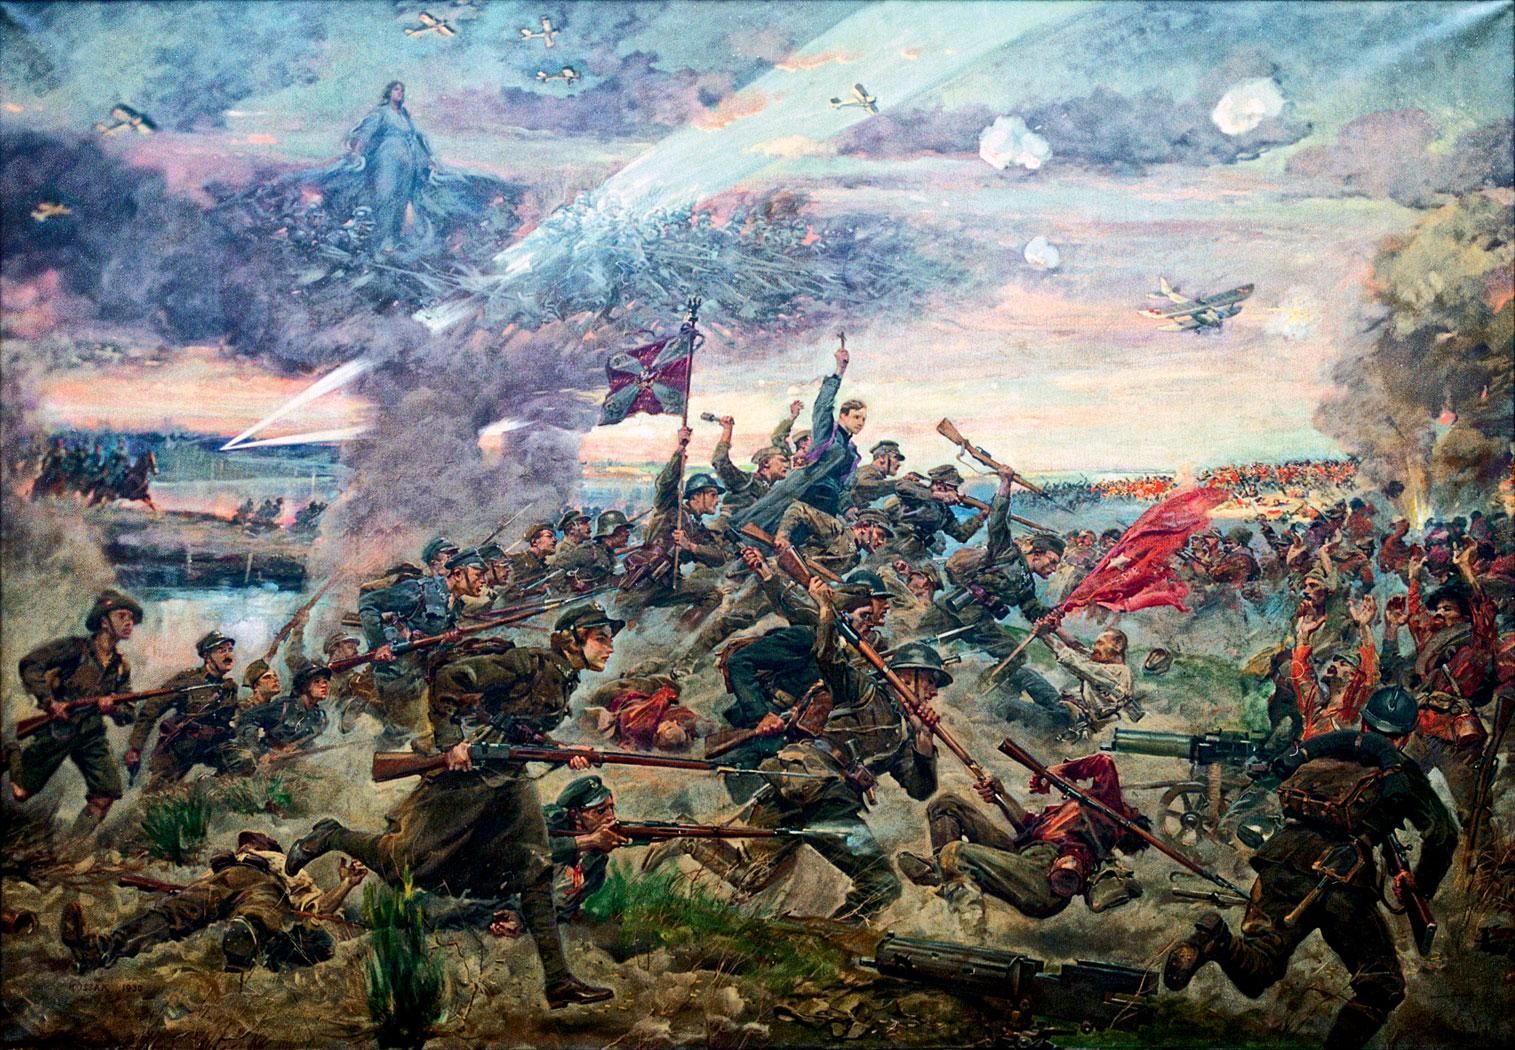 7 Intriguing Things Inspired by the Battle of Warsaw | Article | Culture.pl